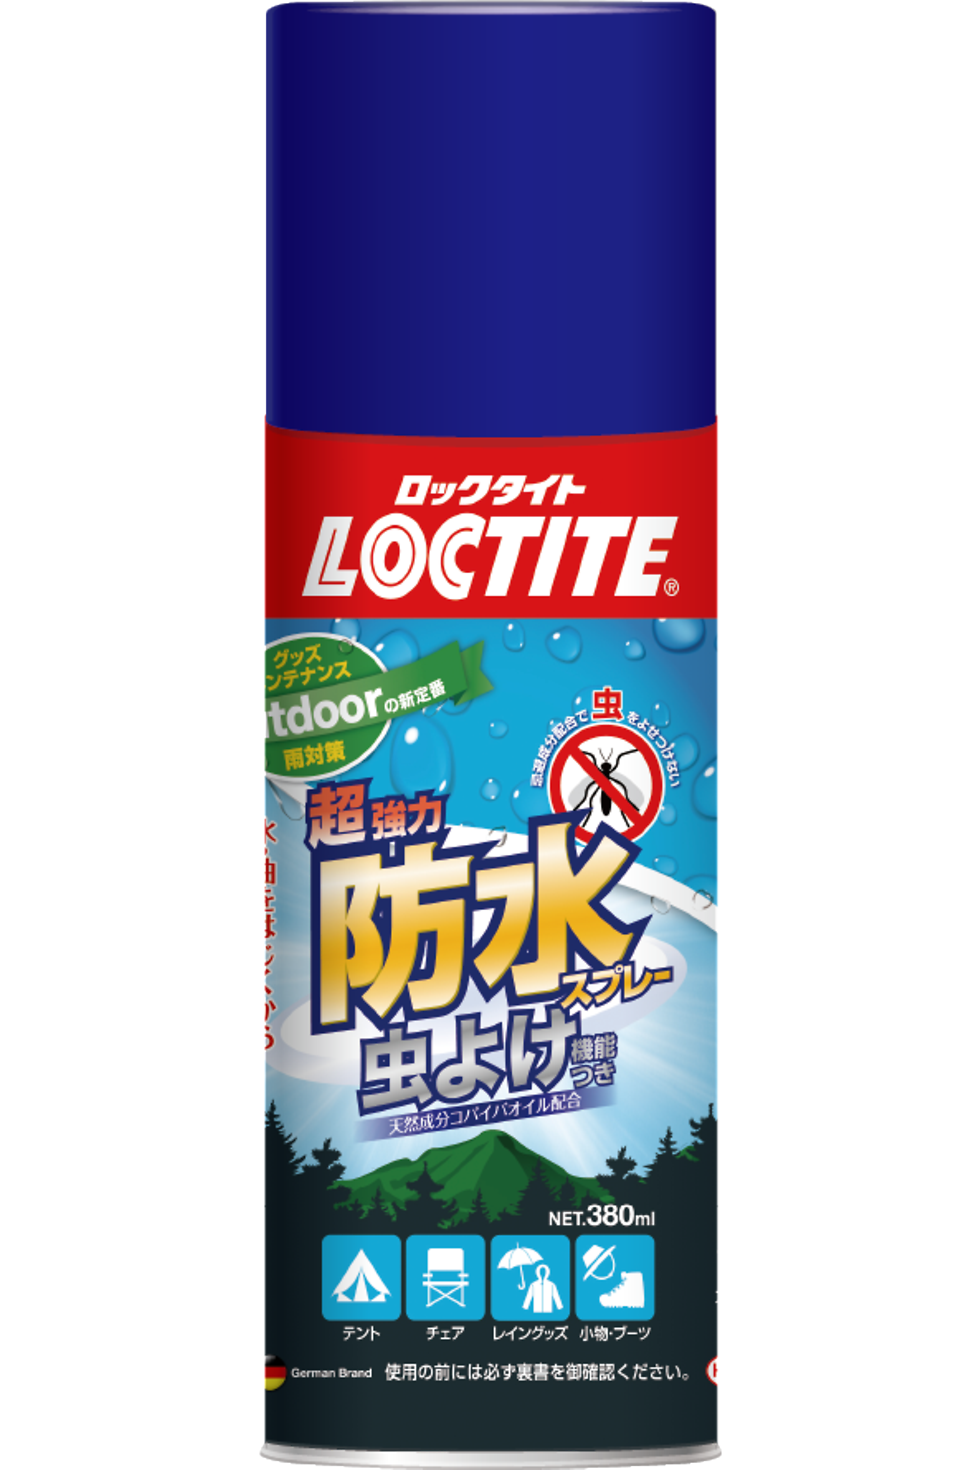 2017-05-24-Loctite WP.png